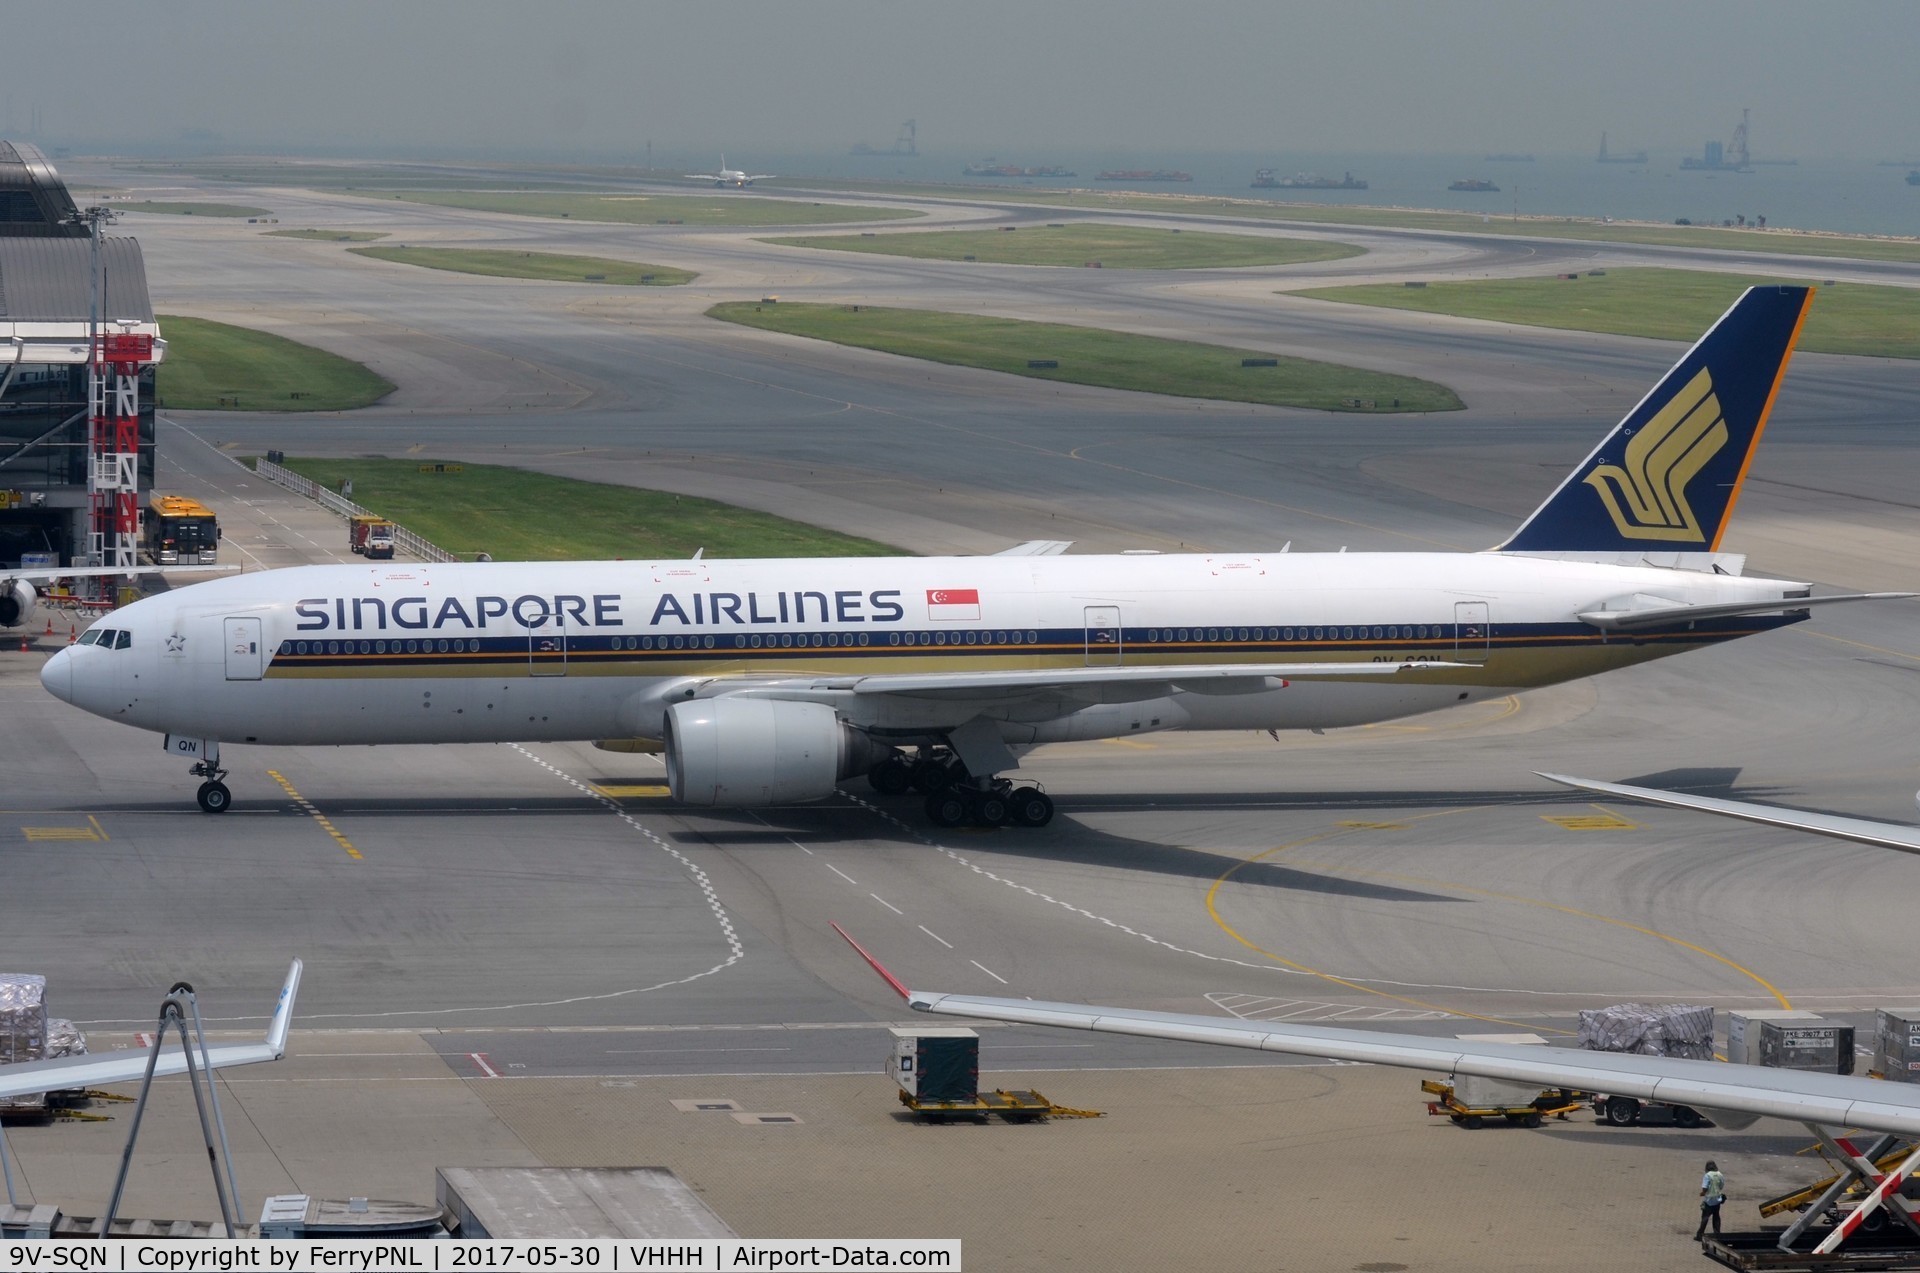 9V-SQN, 2004 Boeing 777-212/ER C/N 33373, Singapore B772 finding its way to the gate.